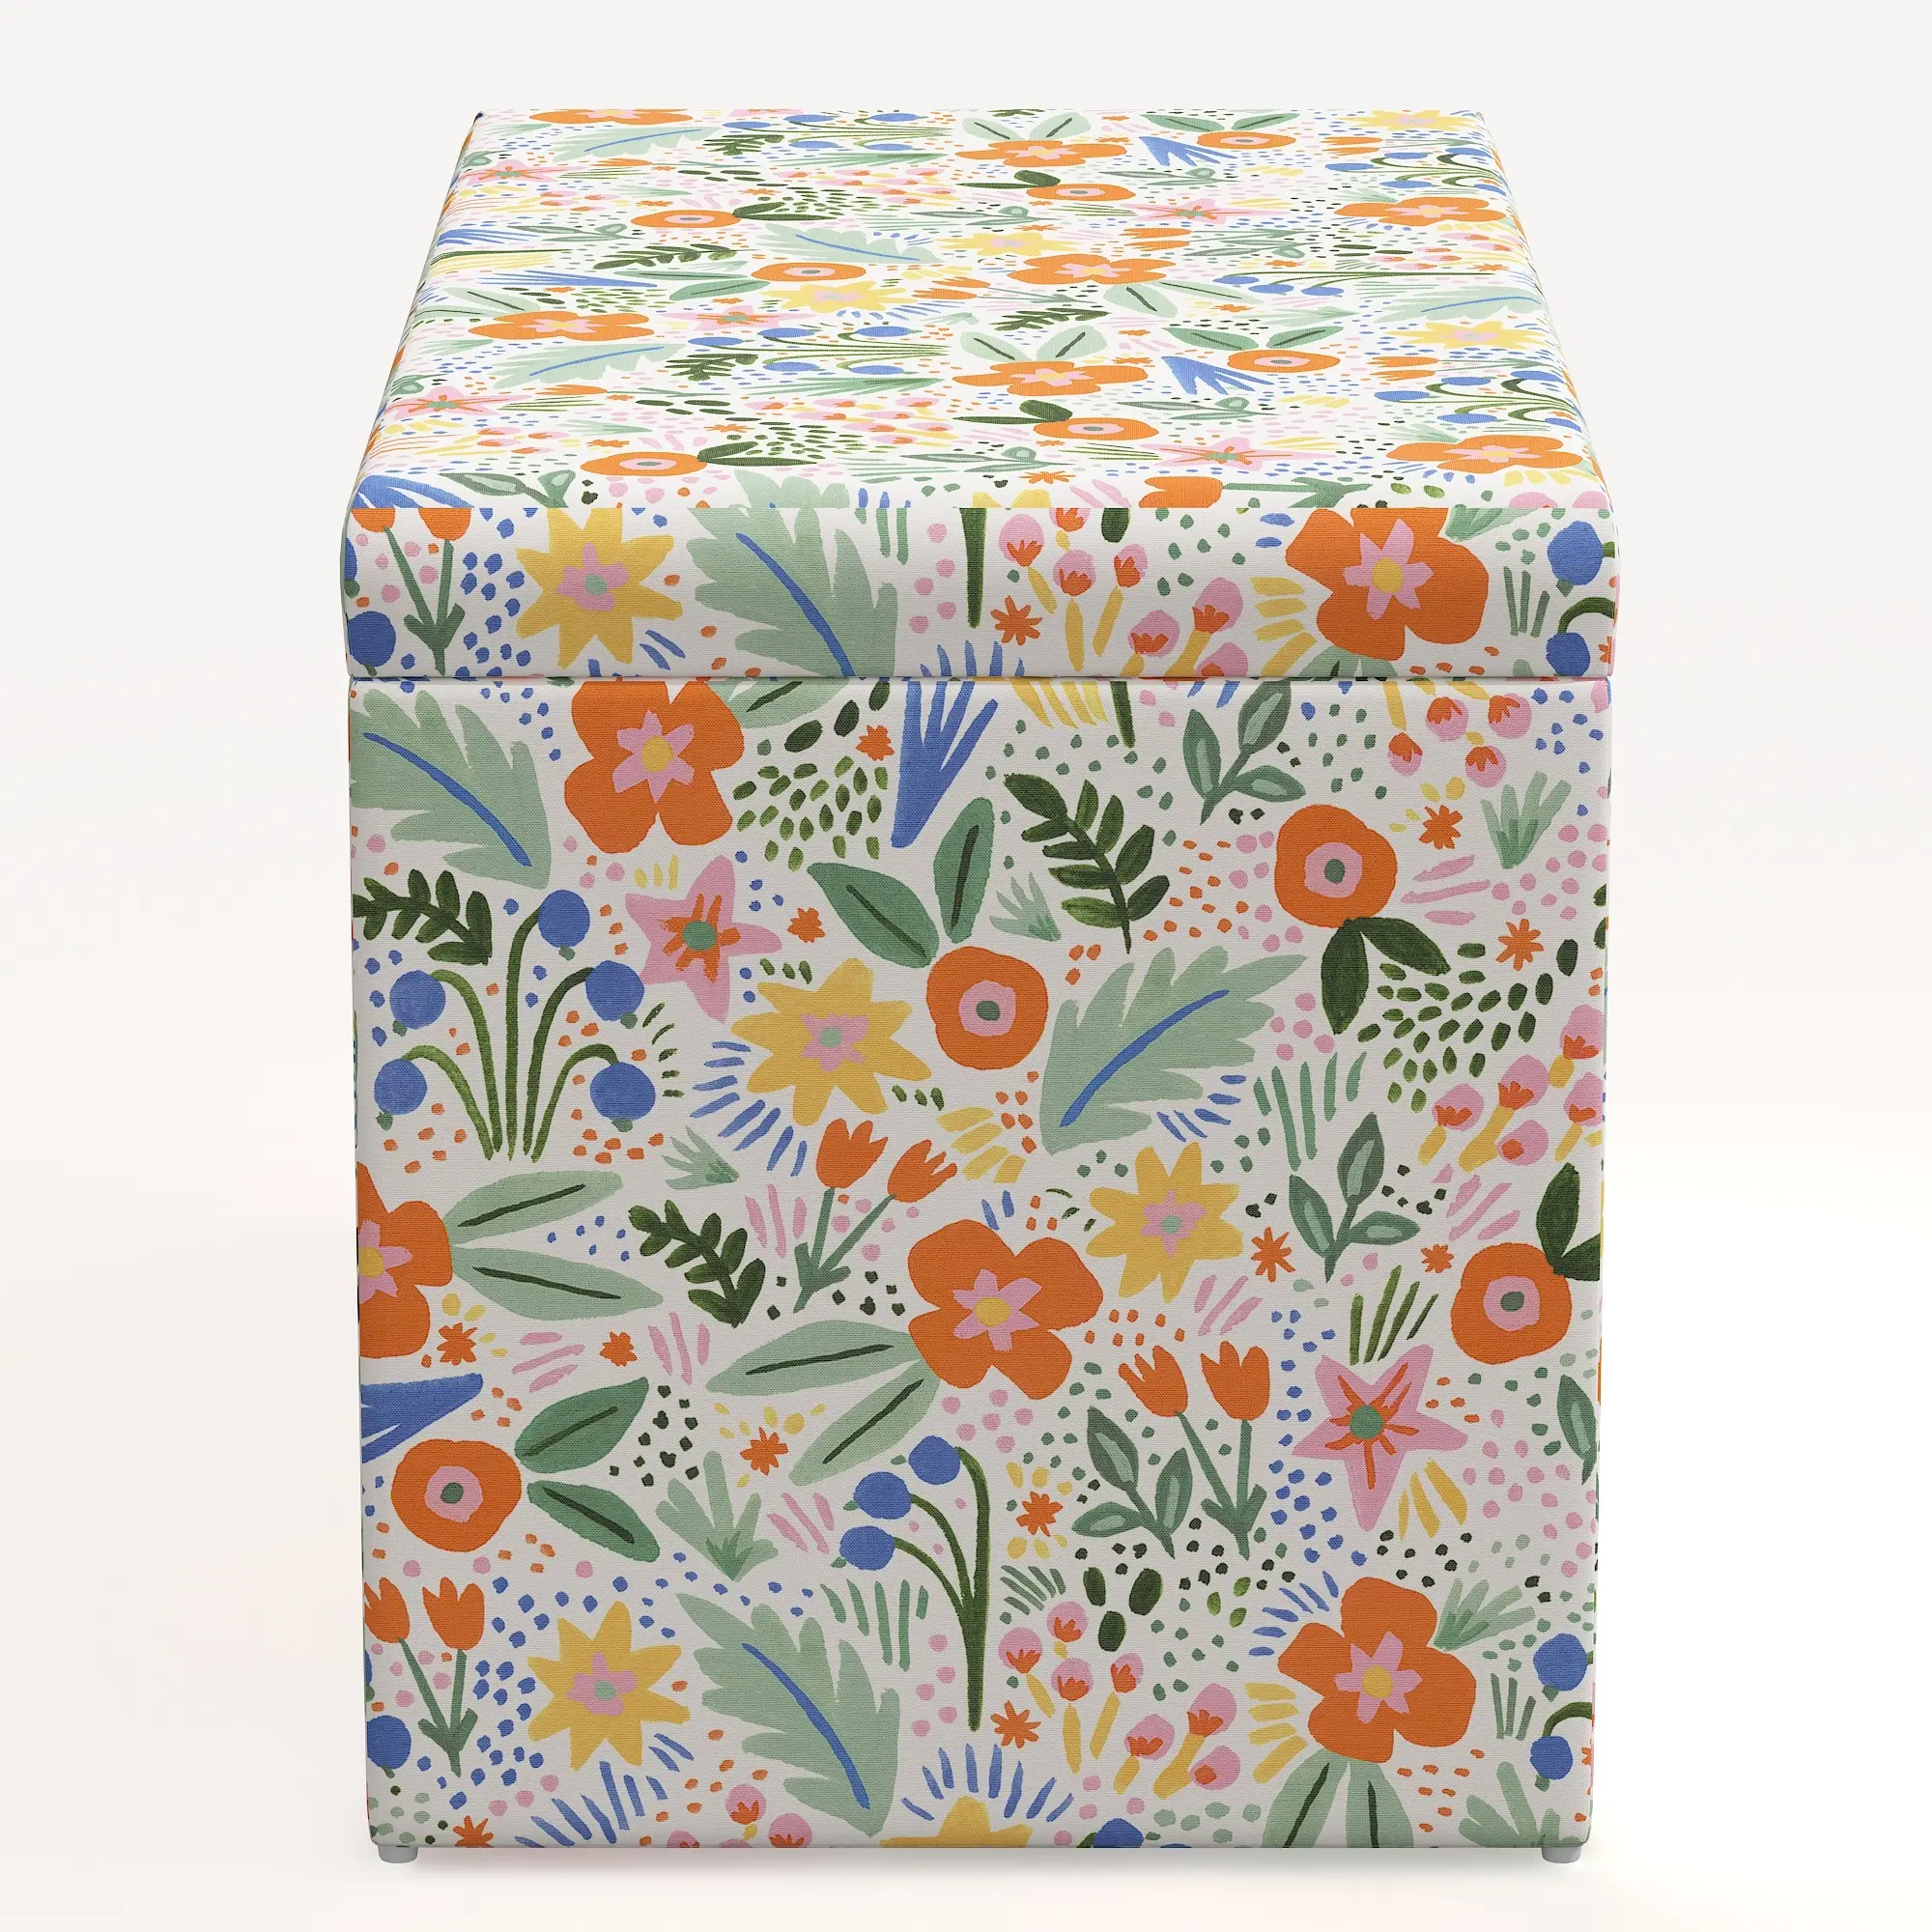 Rifle Paper Co. Willie Merida Multicolor Floral Storage Bench